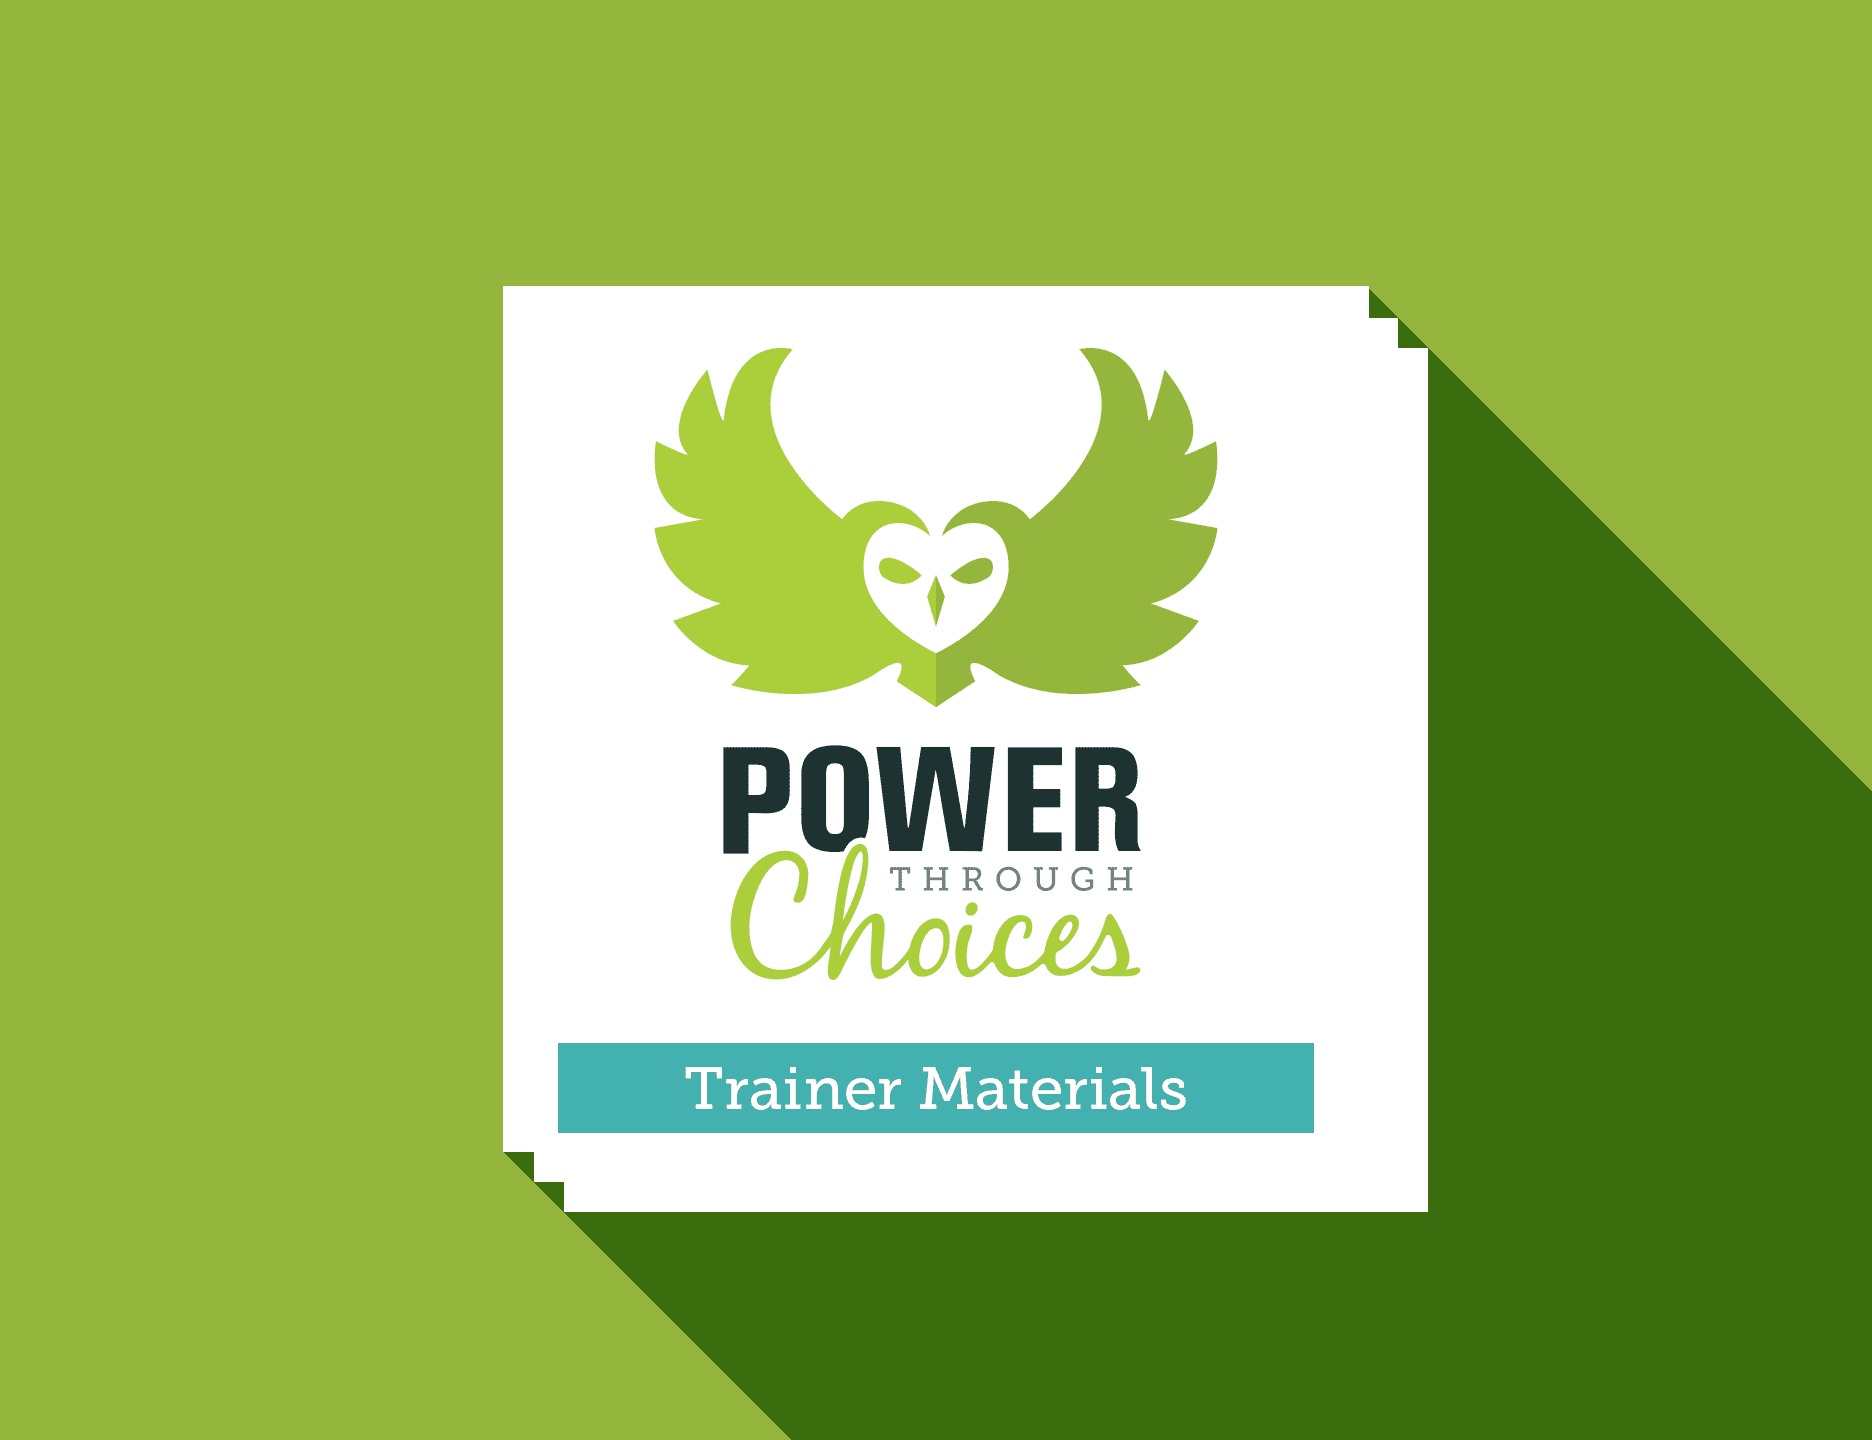 Cover image for Power Through Choices trainer materials with owl logo